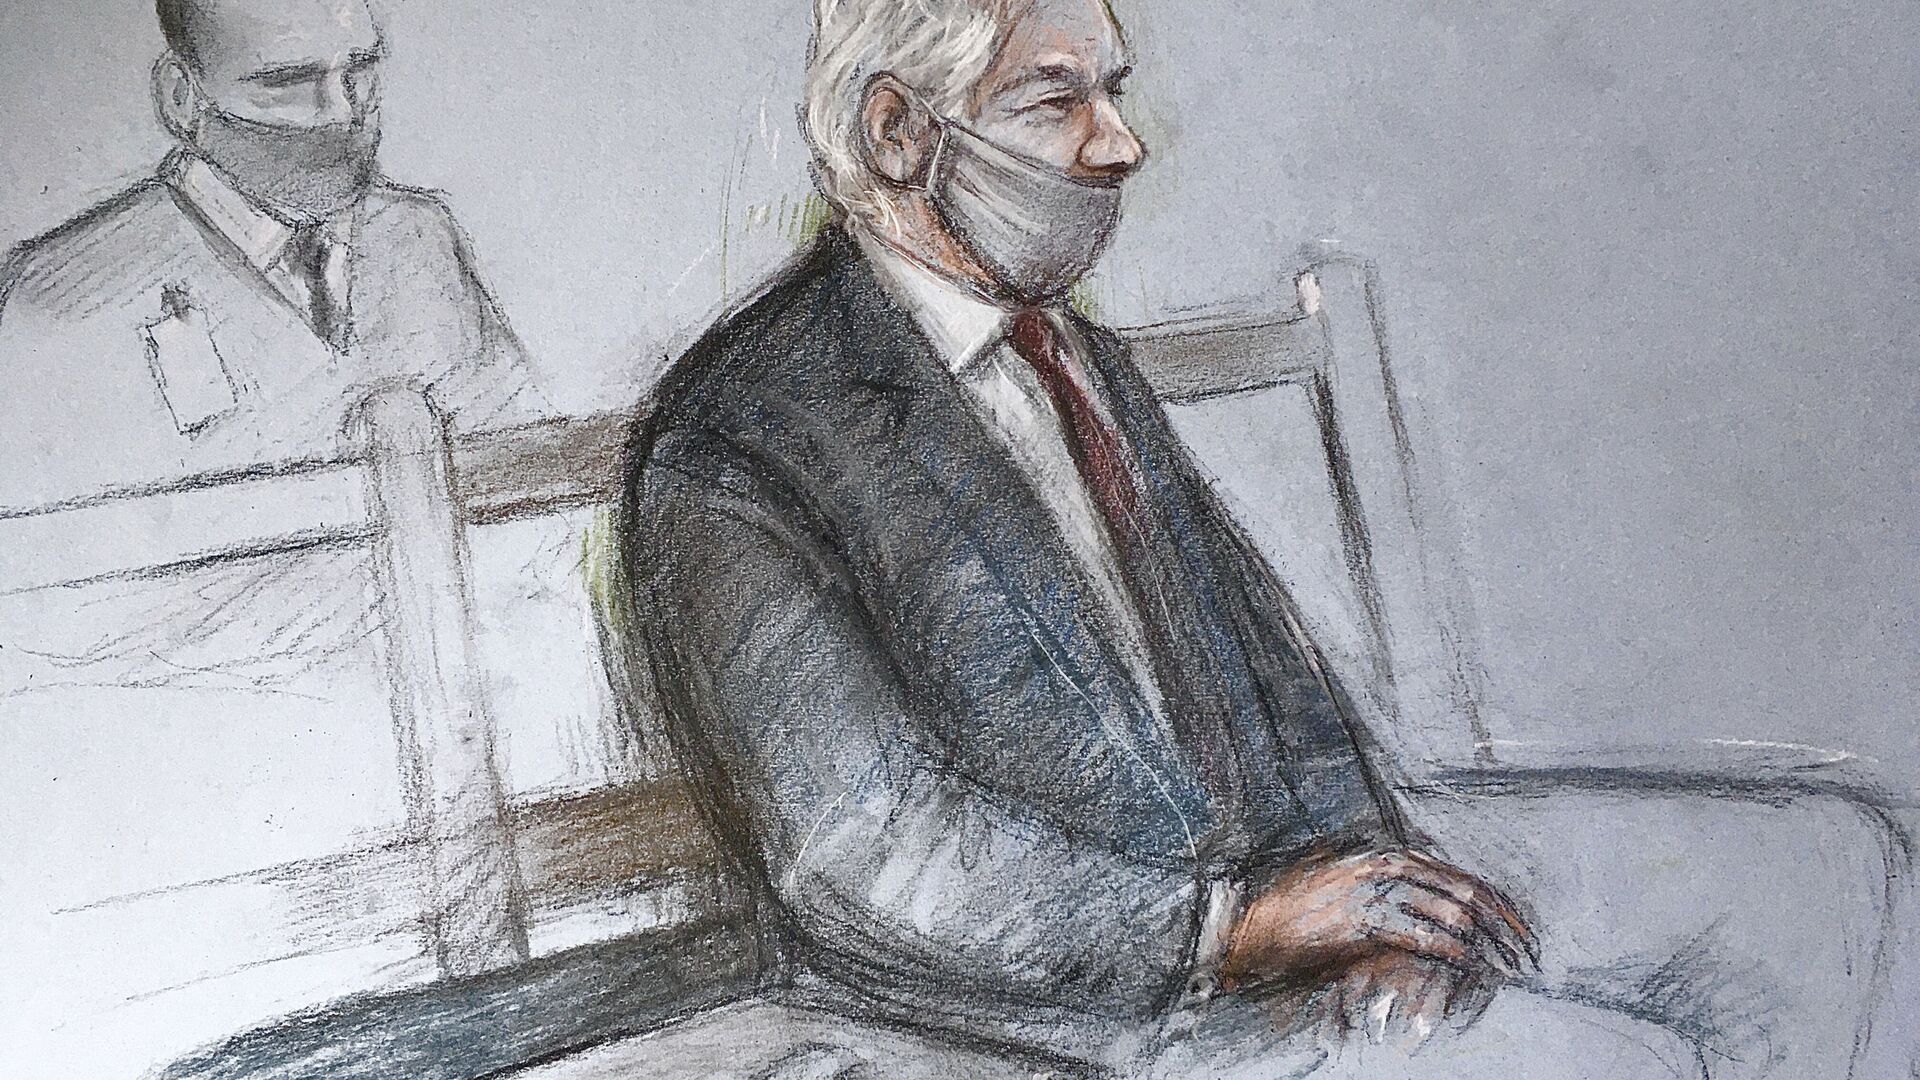 This is a court artist sketch by Elizabeth Cook of Julian Assange appearing at the Old Bailey in London for the ruling in his extradition case, in London, Monday, Jan. 4, 2021. A British judge has rejected the United States’ request to extradite WikiLeaks founder Julian Assange to face espionage charges, saying it would be “oppressive” because of his mental health. District Judge Vanessa Baraitser said Assange was likely to kill himself if sent to the U.S. The U.S. government said it would appeal the decision.  (Elizabeth Cook/PA via AP) - Sputnik International, 1920, 13.12.2021